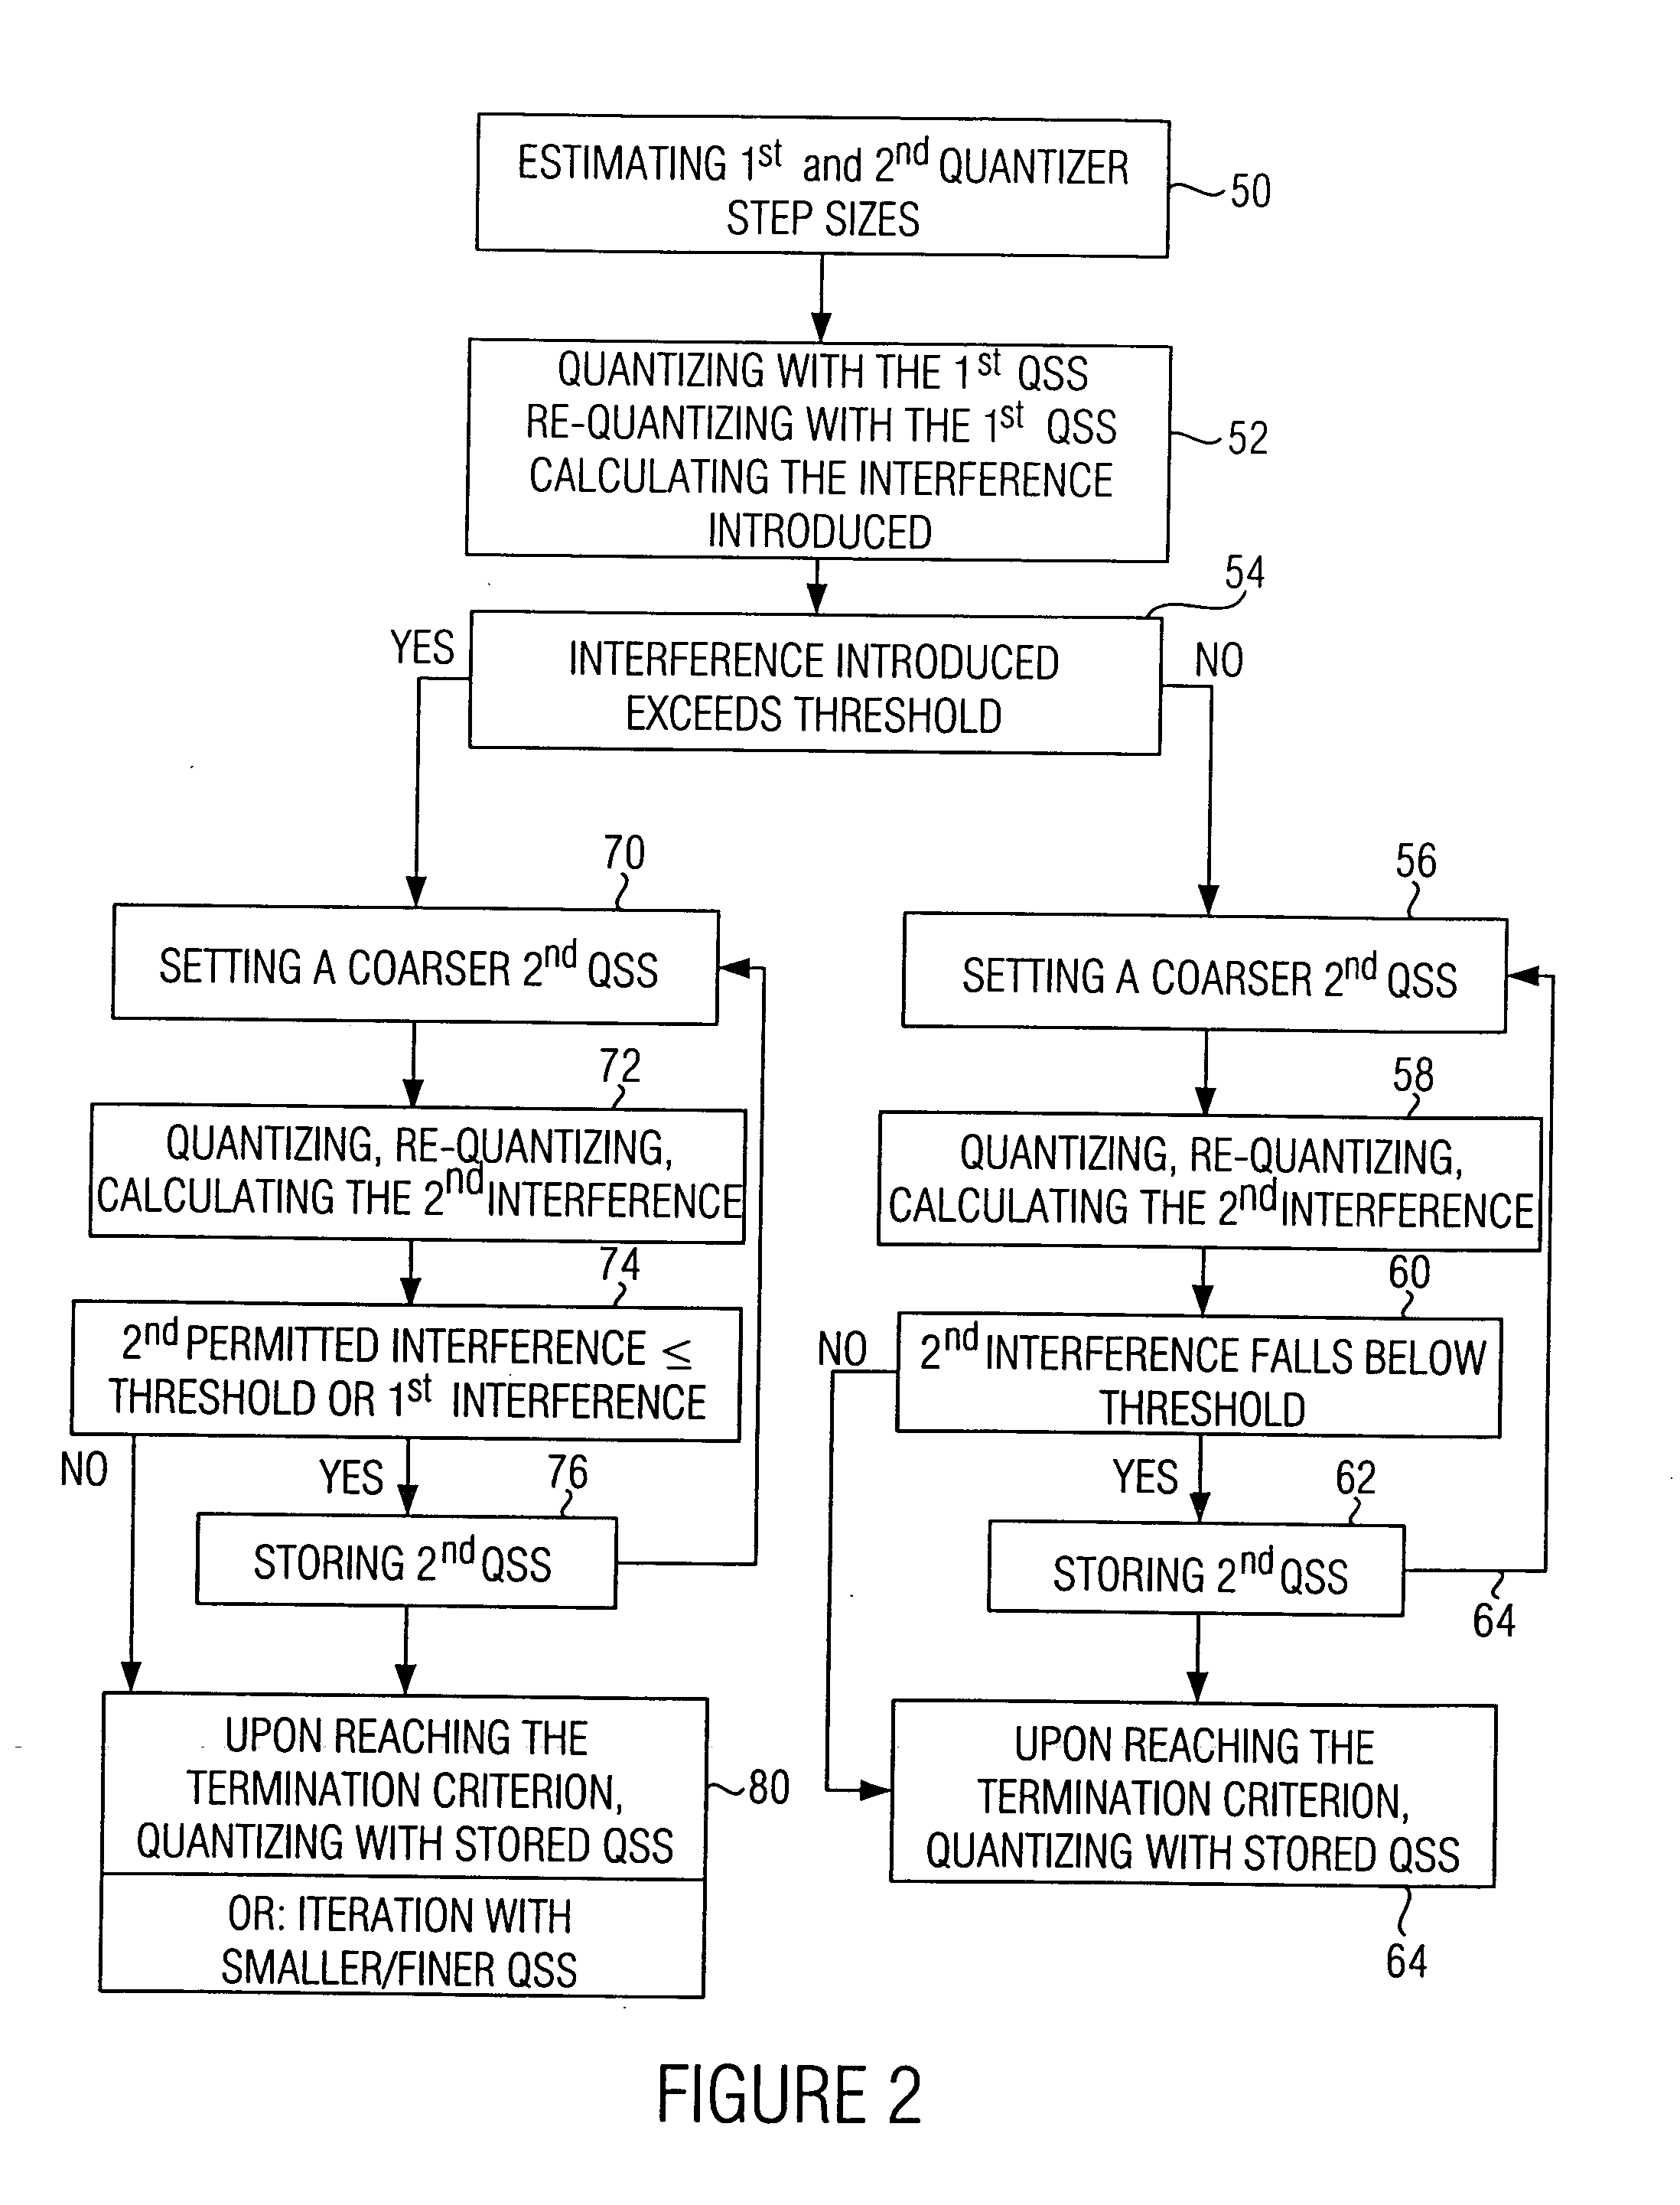 Apparatus and method for determining a quantizer step size